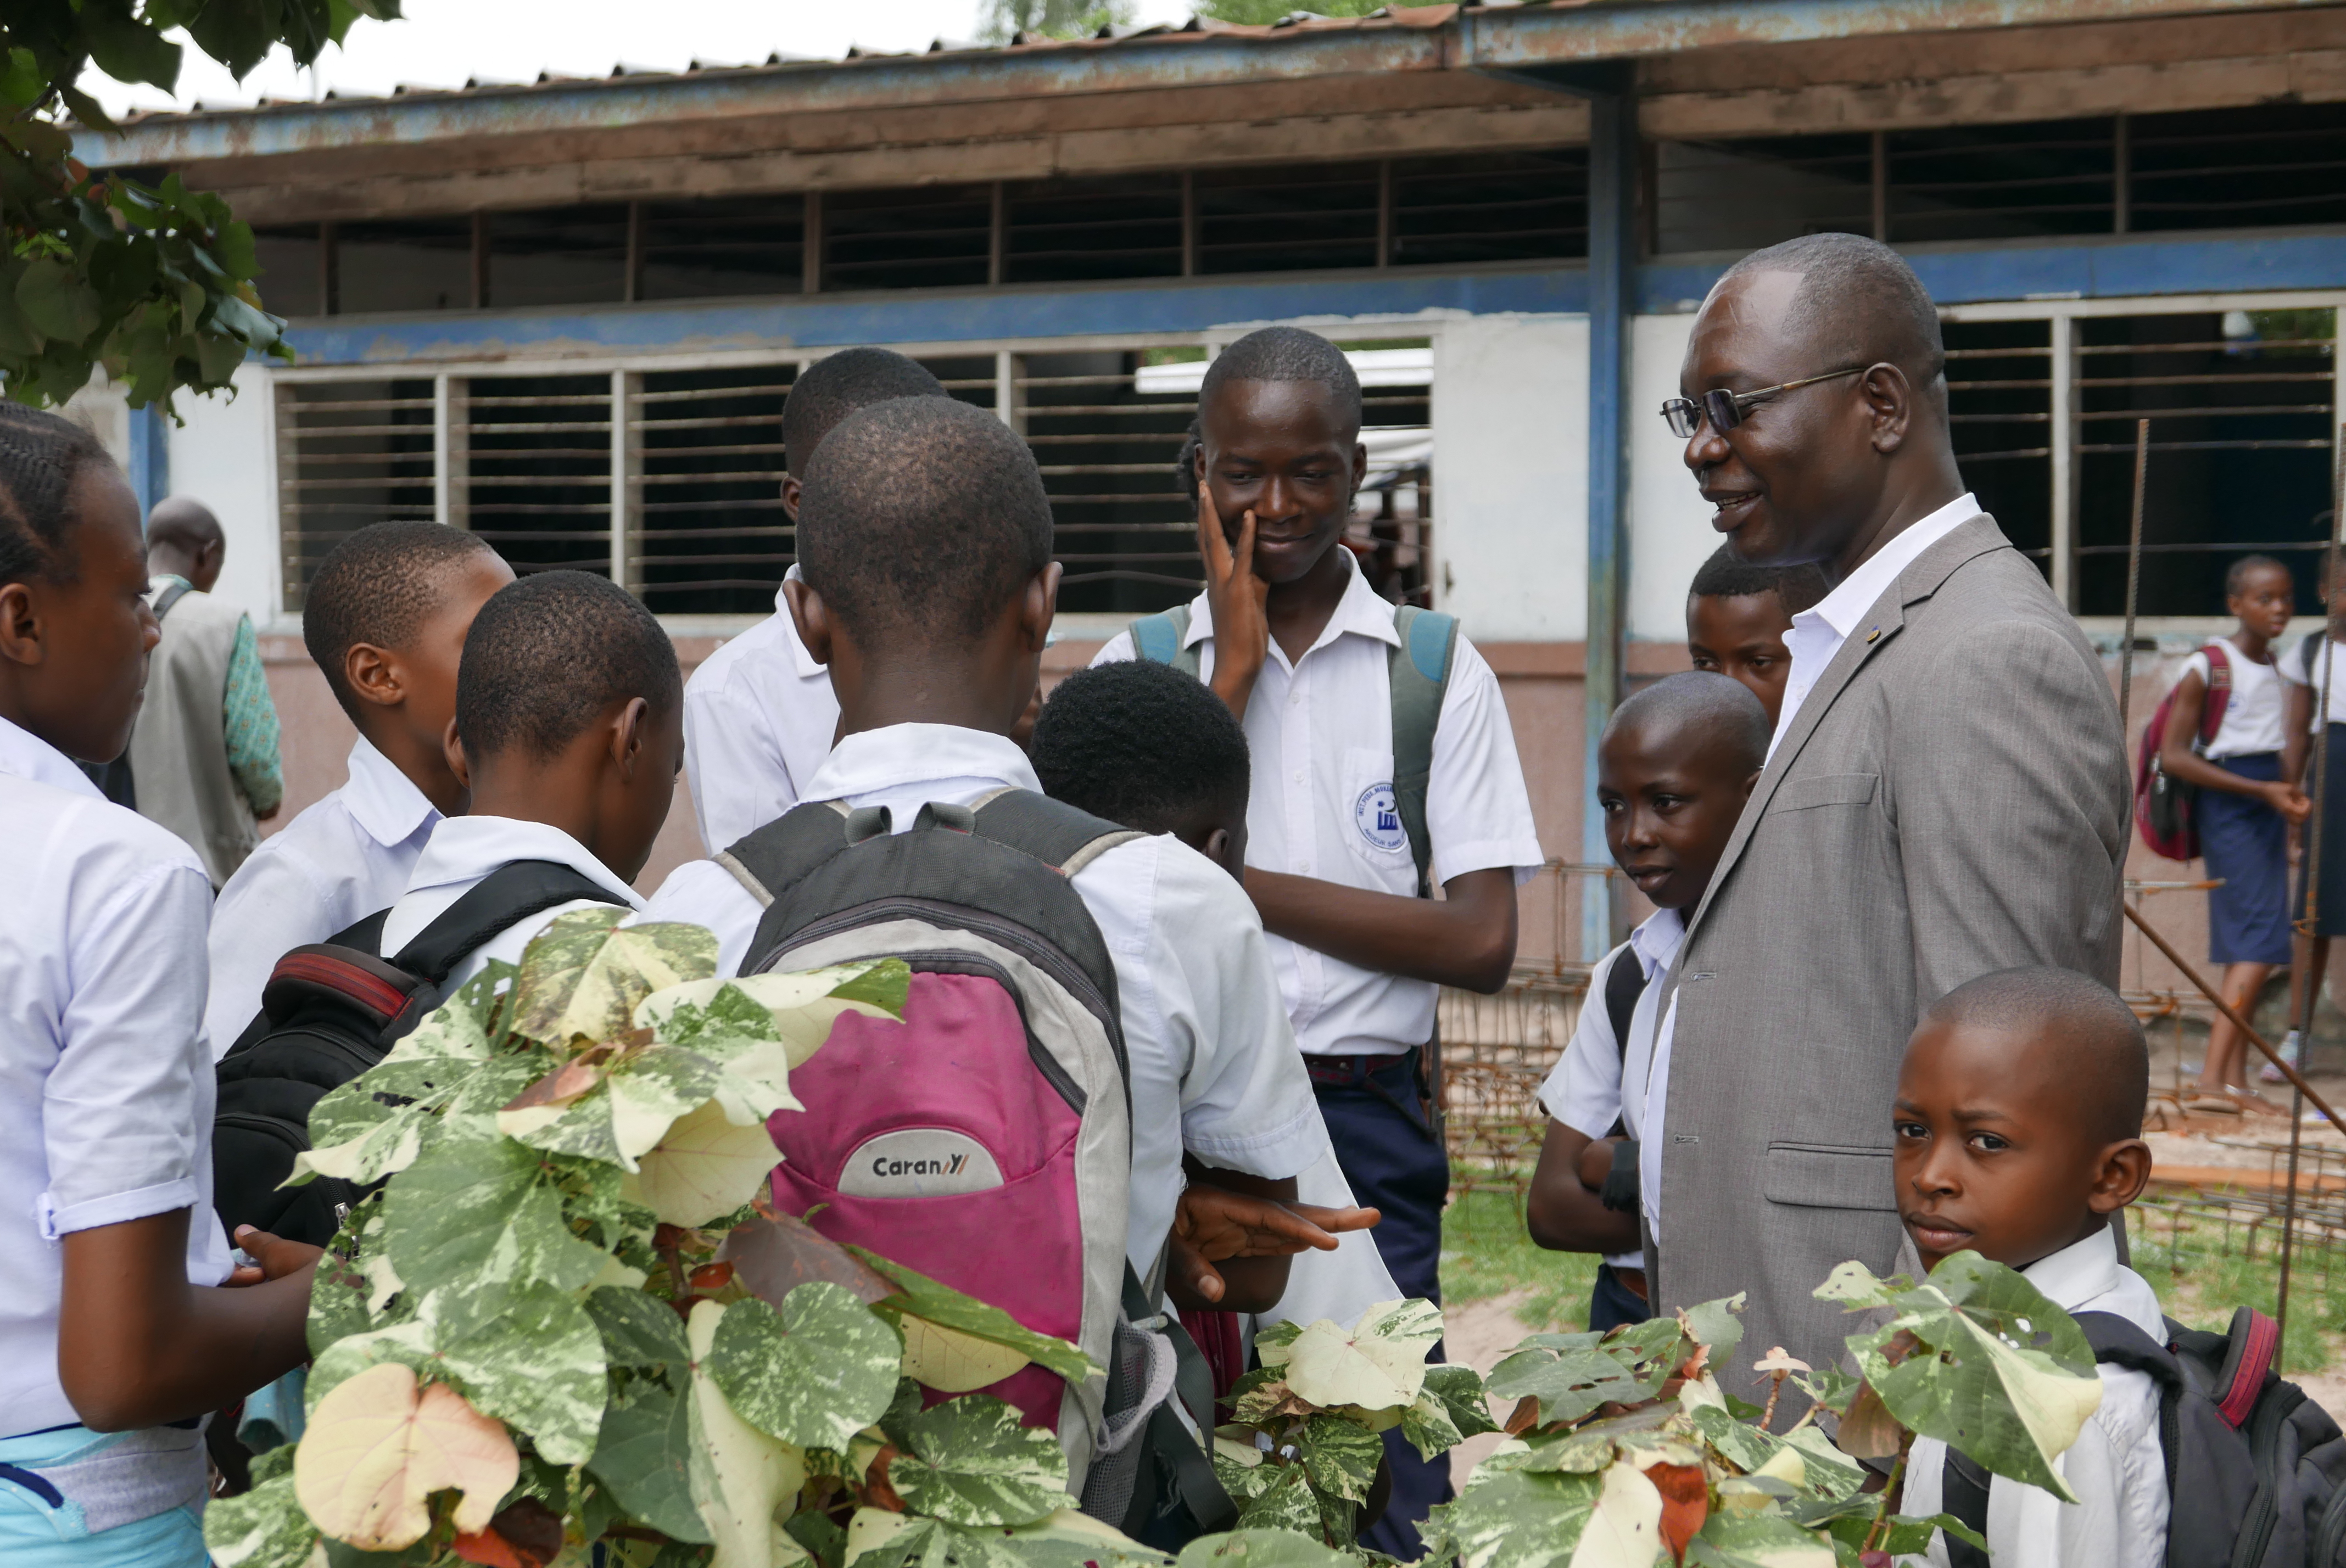 Pastor Isaac speaks with students at the school where he taught for over 15 years.